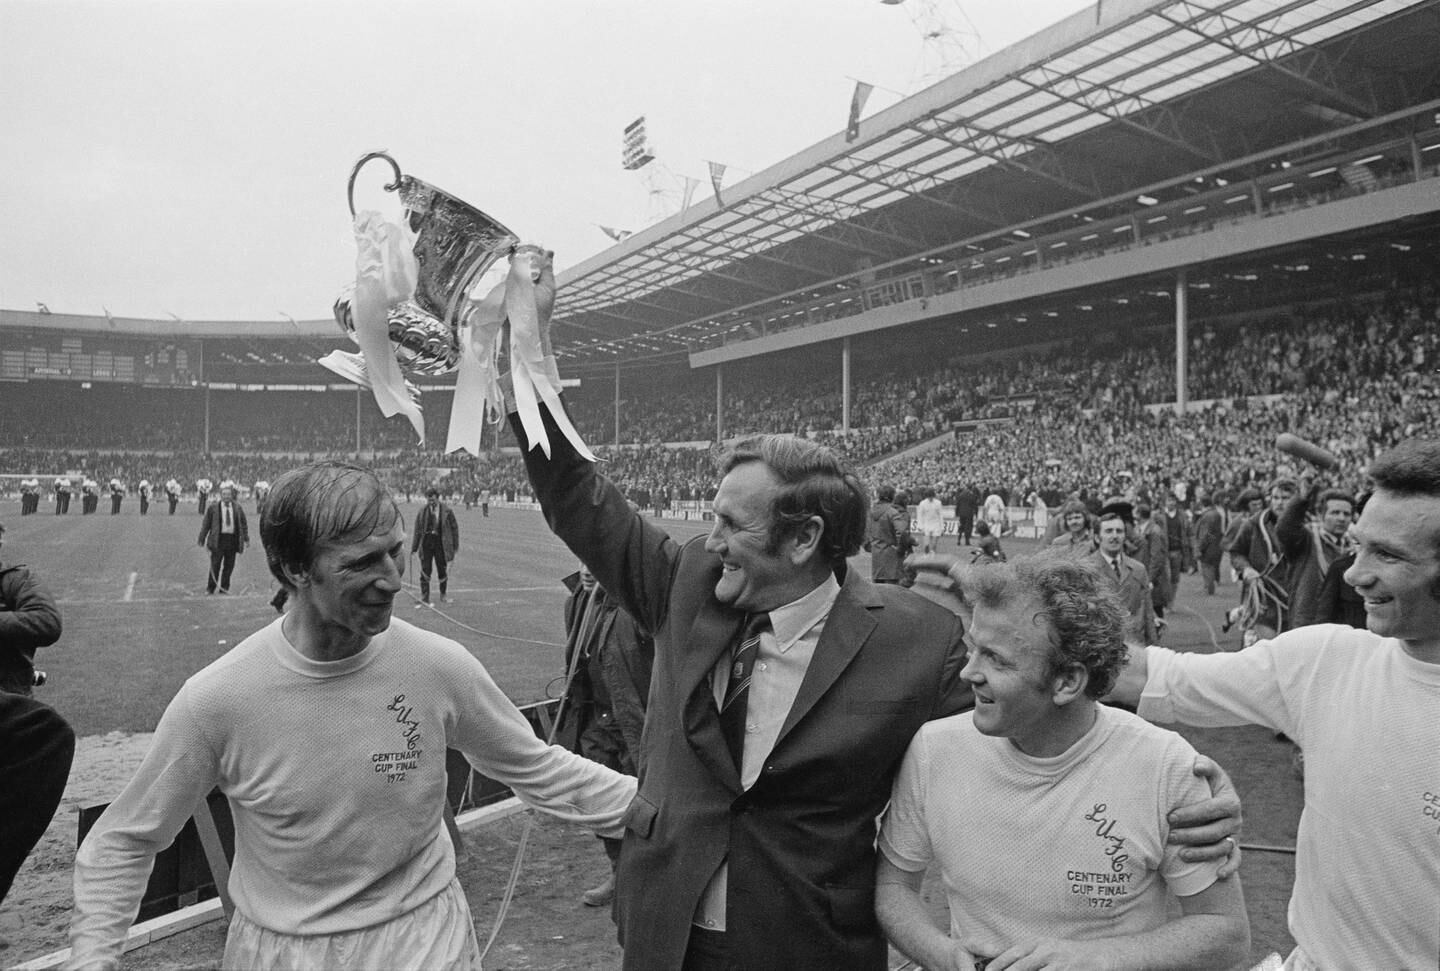 Liz Truss said she wanted to channel the spirit of Don Revie, centre, Leeds United's most successful manager who also coached the UAE national team. Getty 